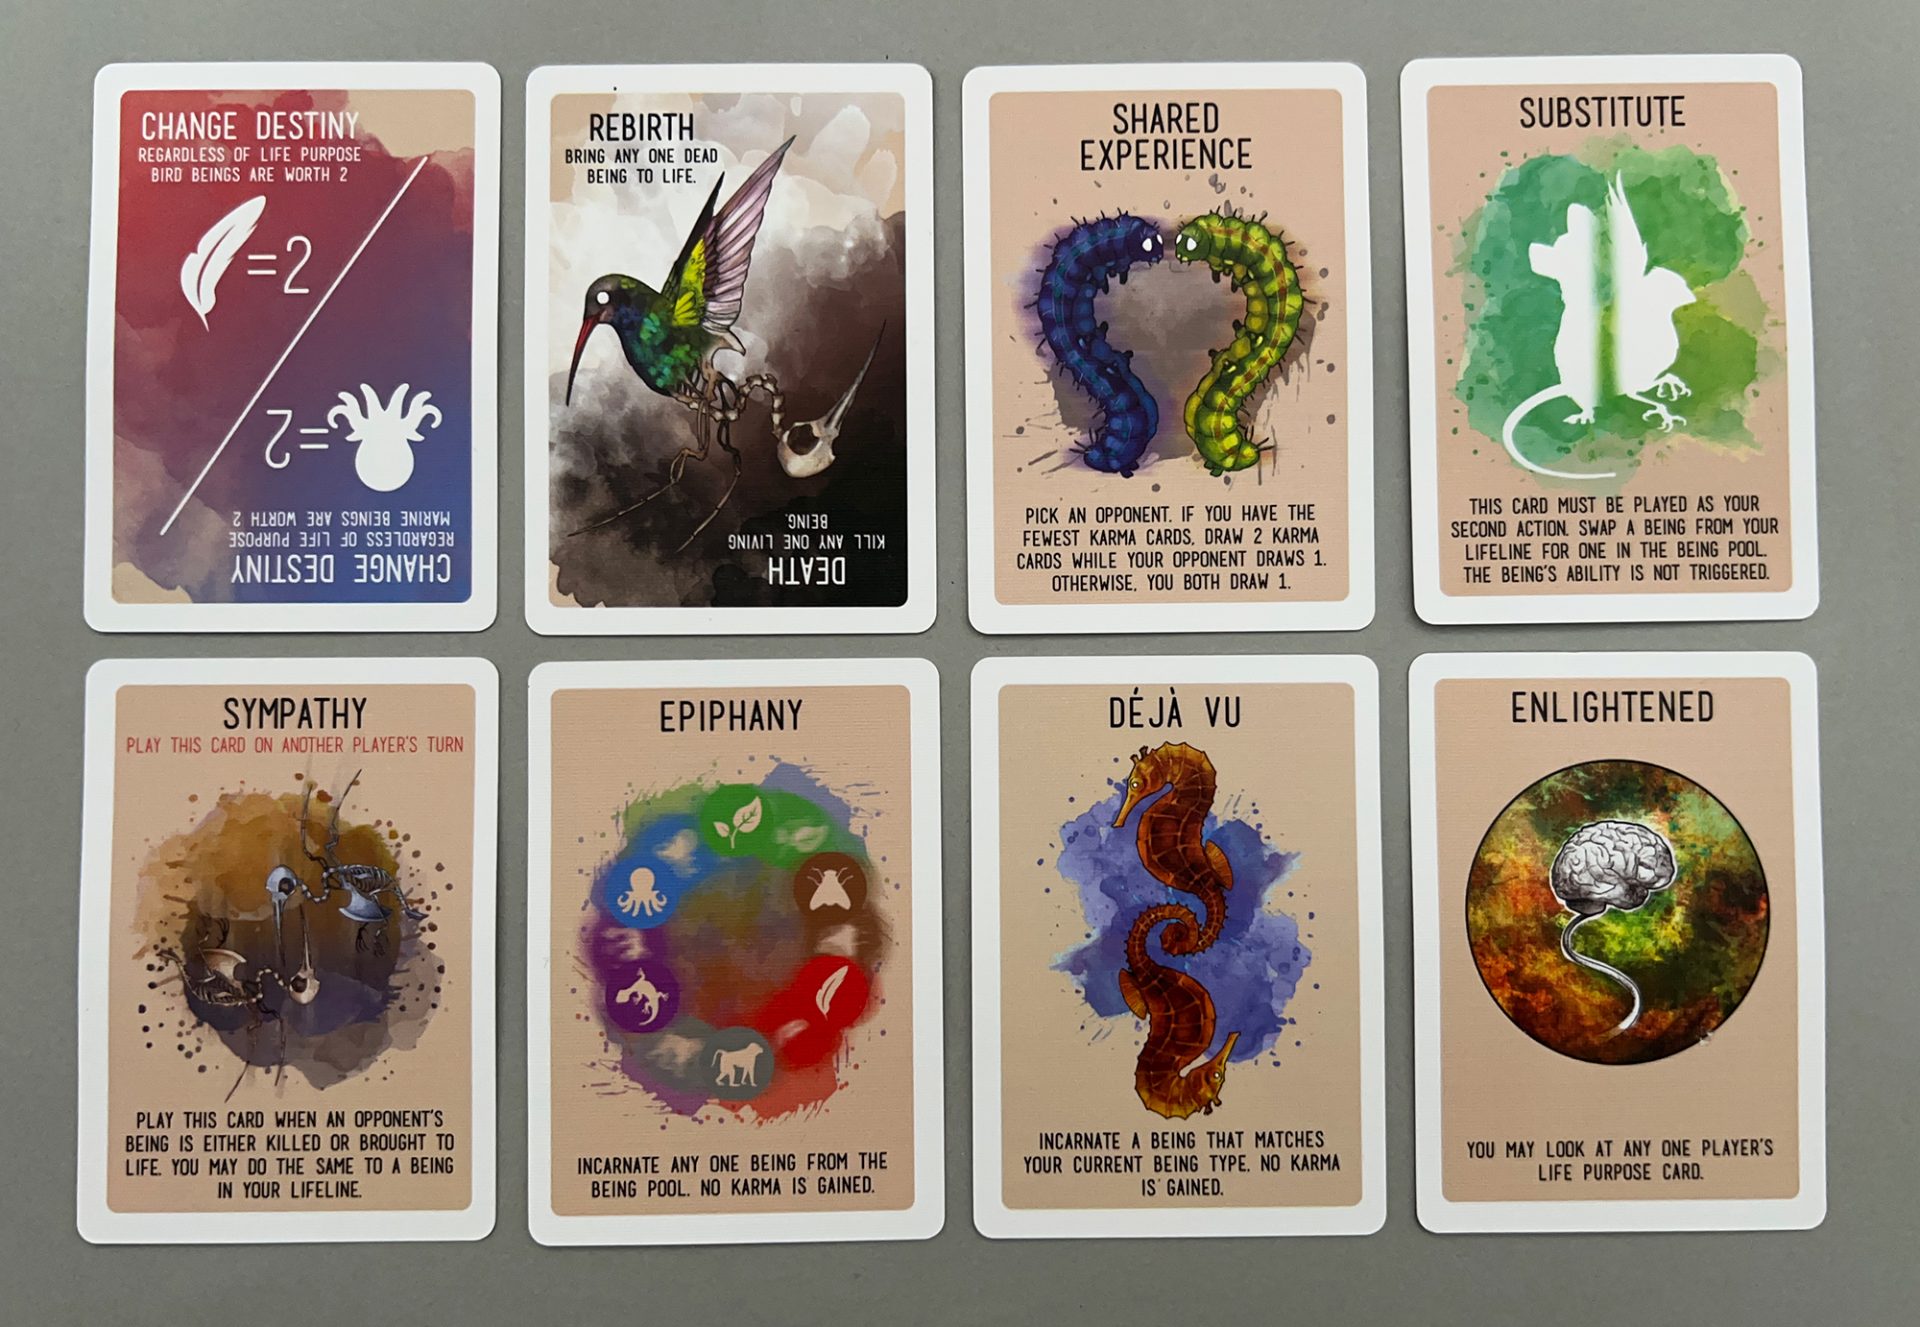 Examples of Karma cards.